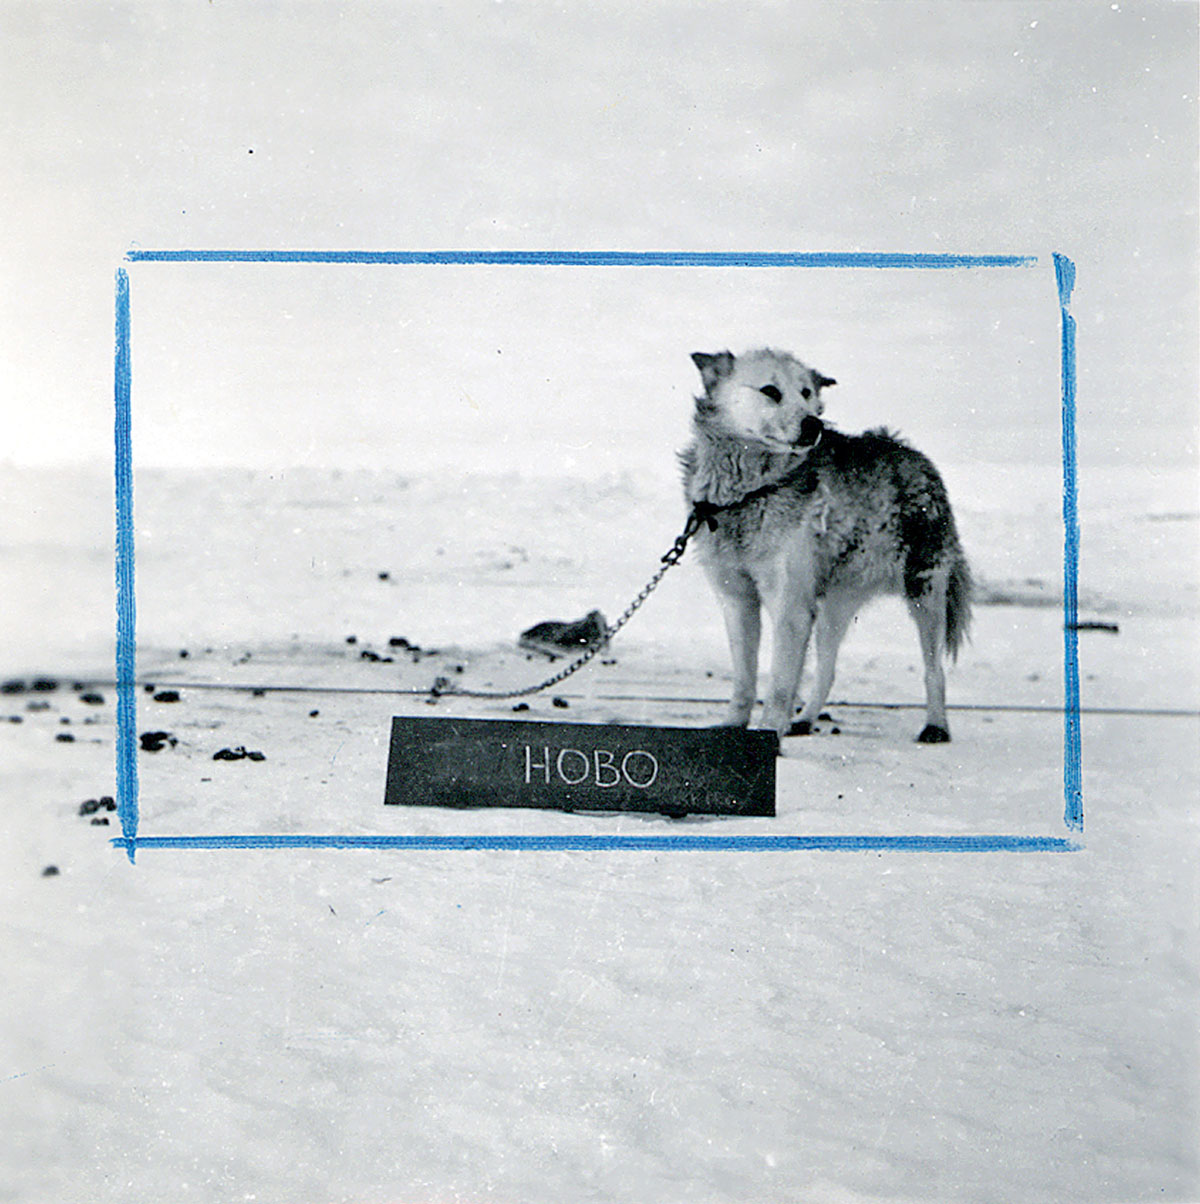 A photograph of a dog framed by blue crop marks, standing behind wooden plaque displaying his name, “Hobo.”